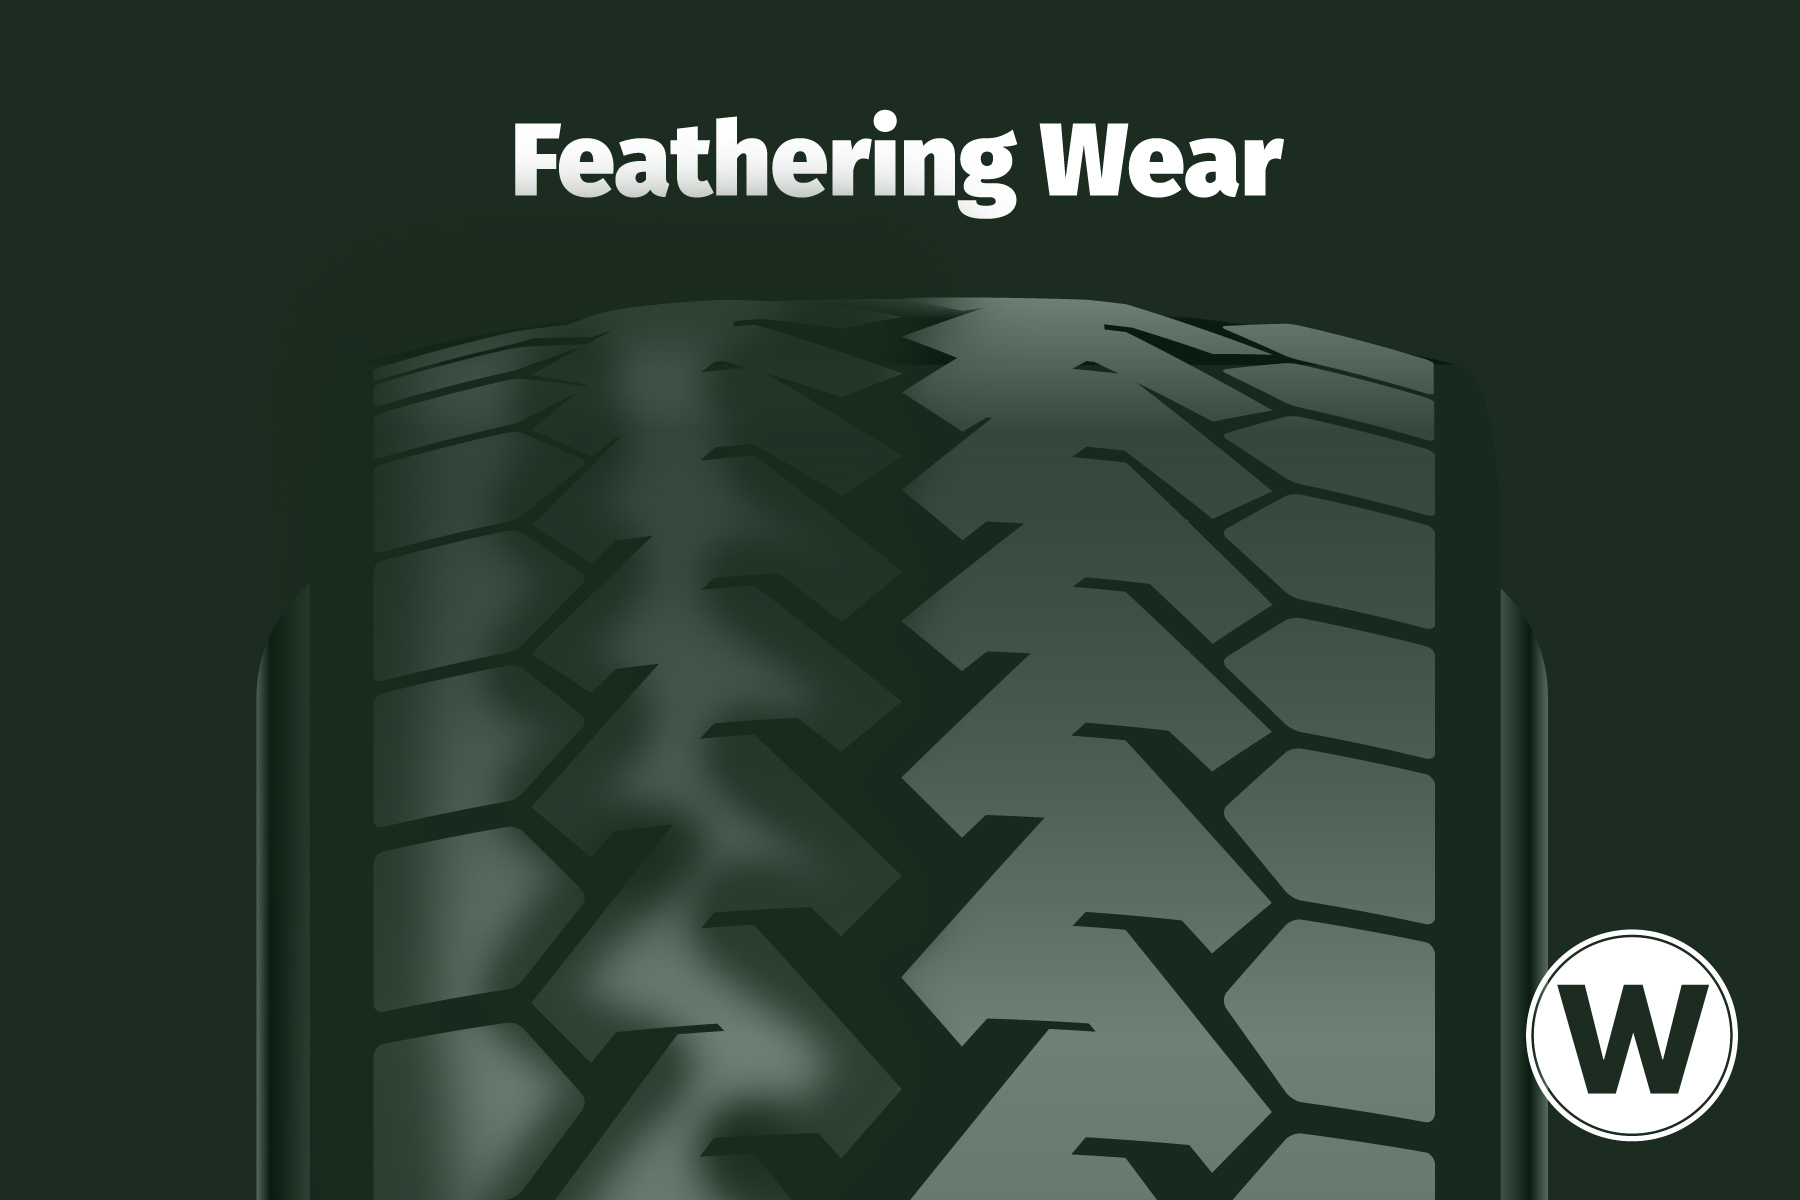 A wear pattern diagram that shows where to find feathering wear on your commercial steer tires.